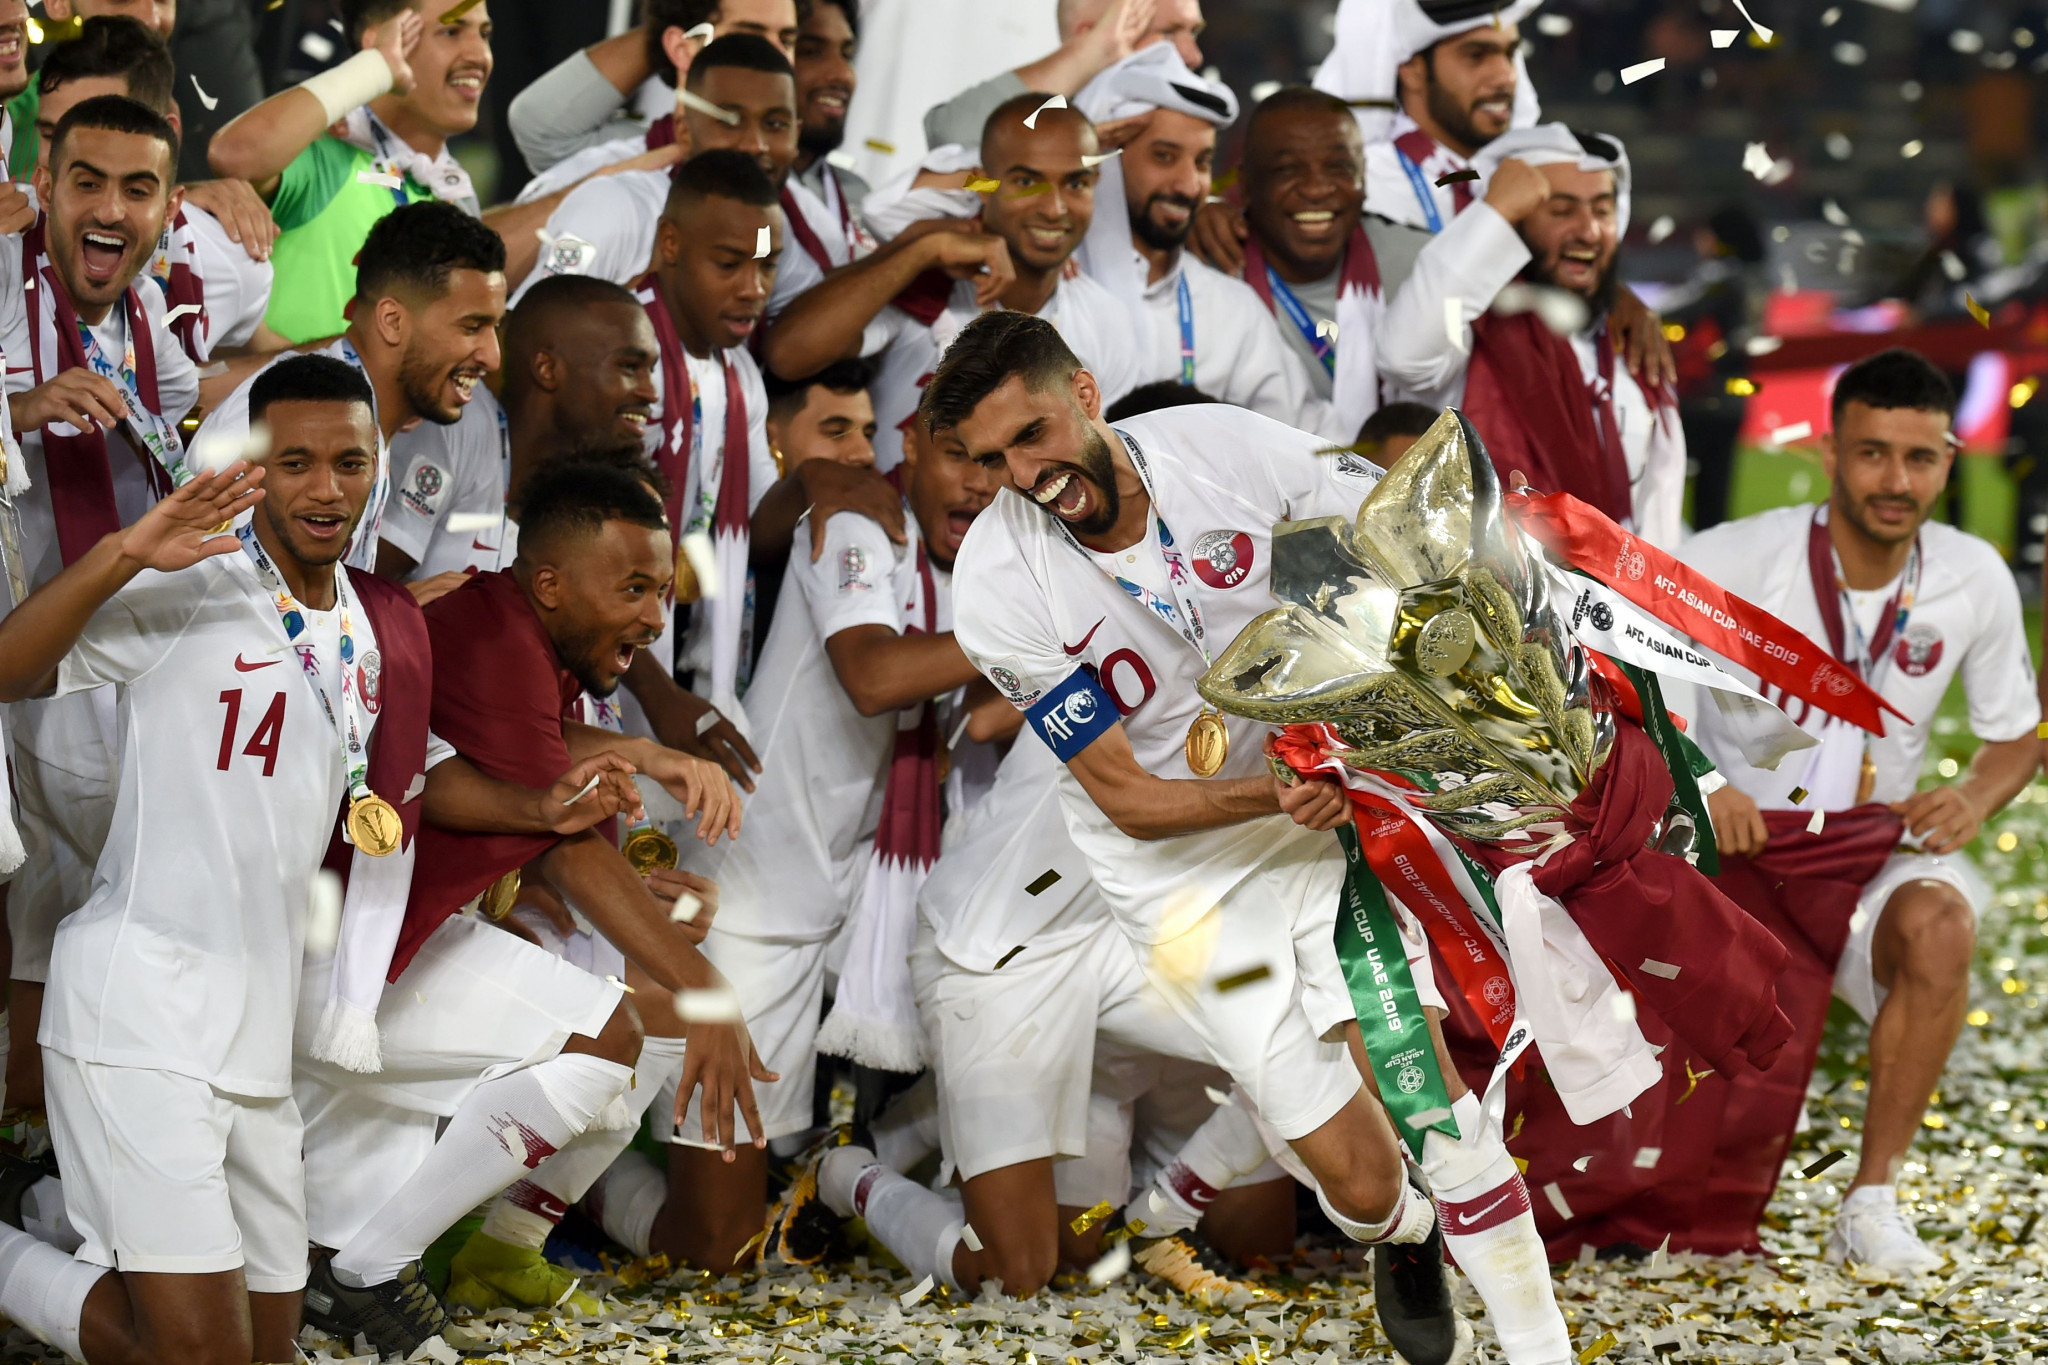 Qatar are the current holders of the AFC Asian Cup after winning the tournament in 2019 ©Getty Images